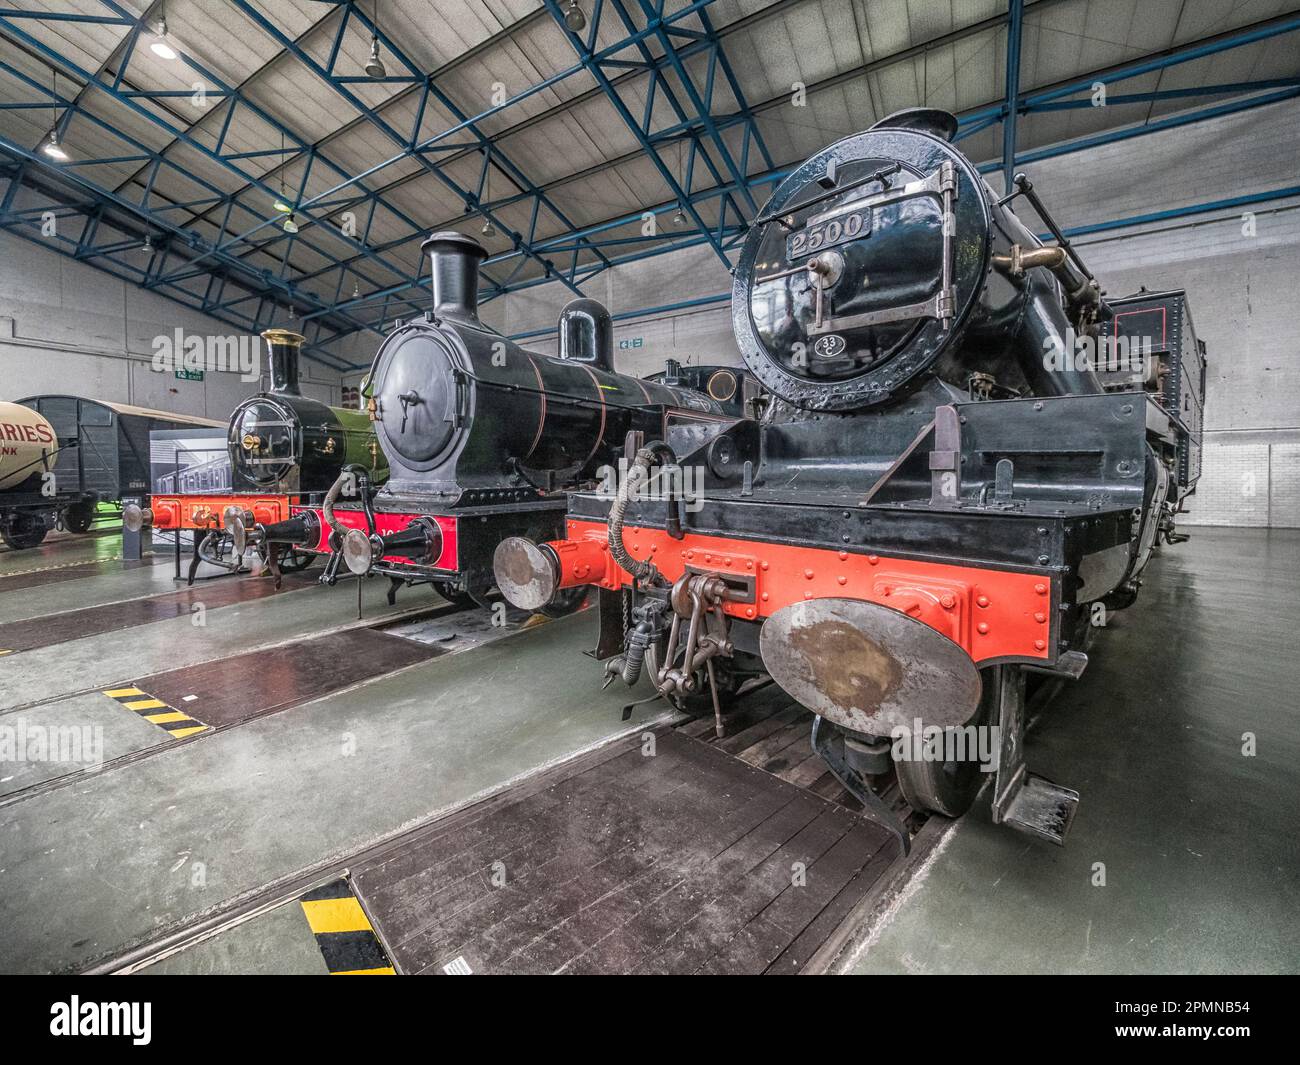 General image inside the National Railway Museum in York seen here featuring various locomotives Stock Photo